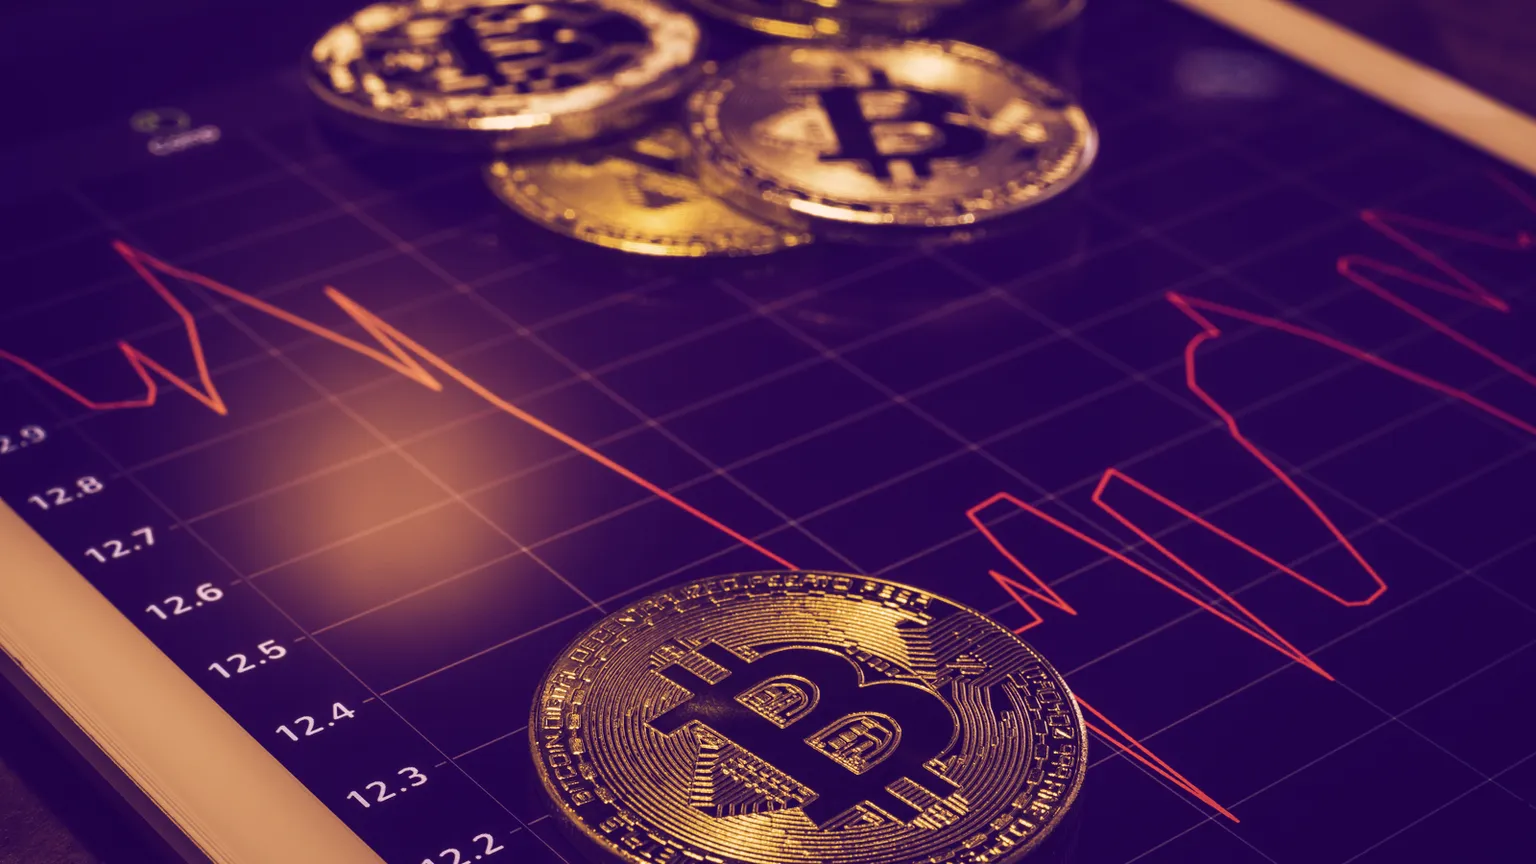 Bitcoin's price has dropped. Image: Shutterstock